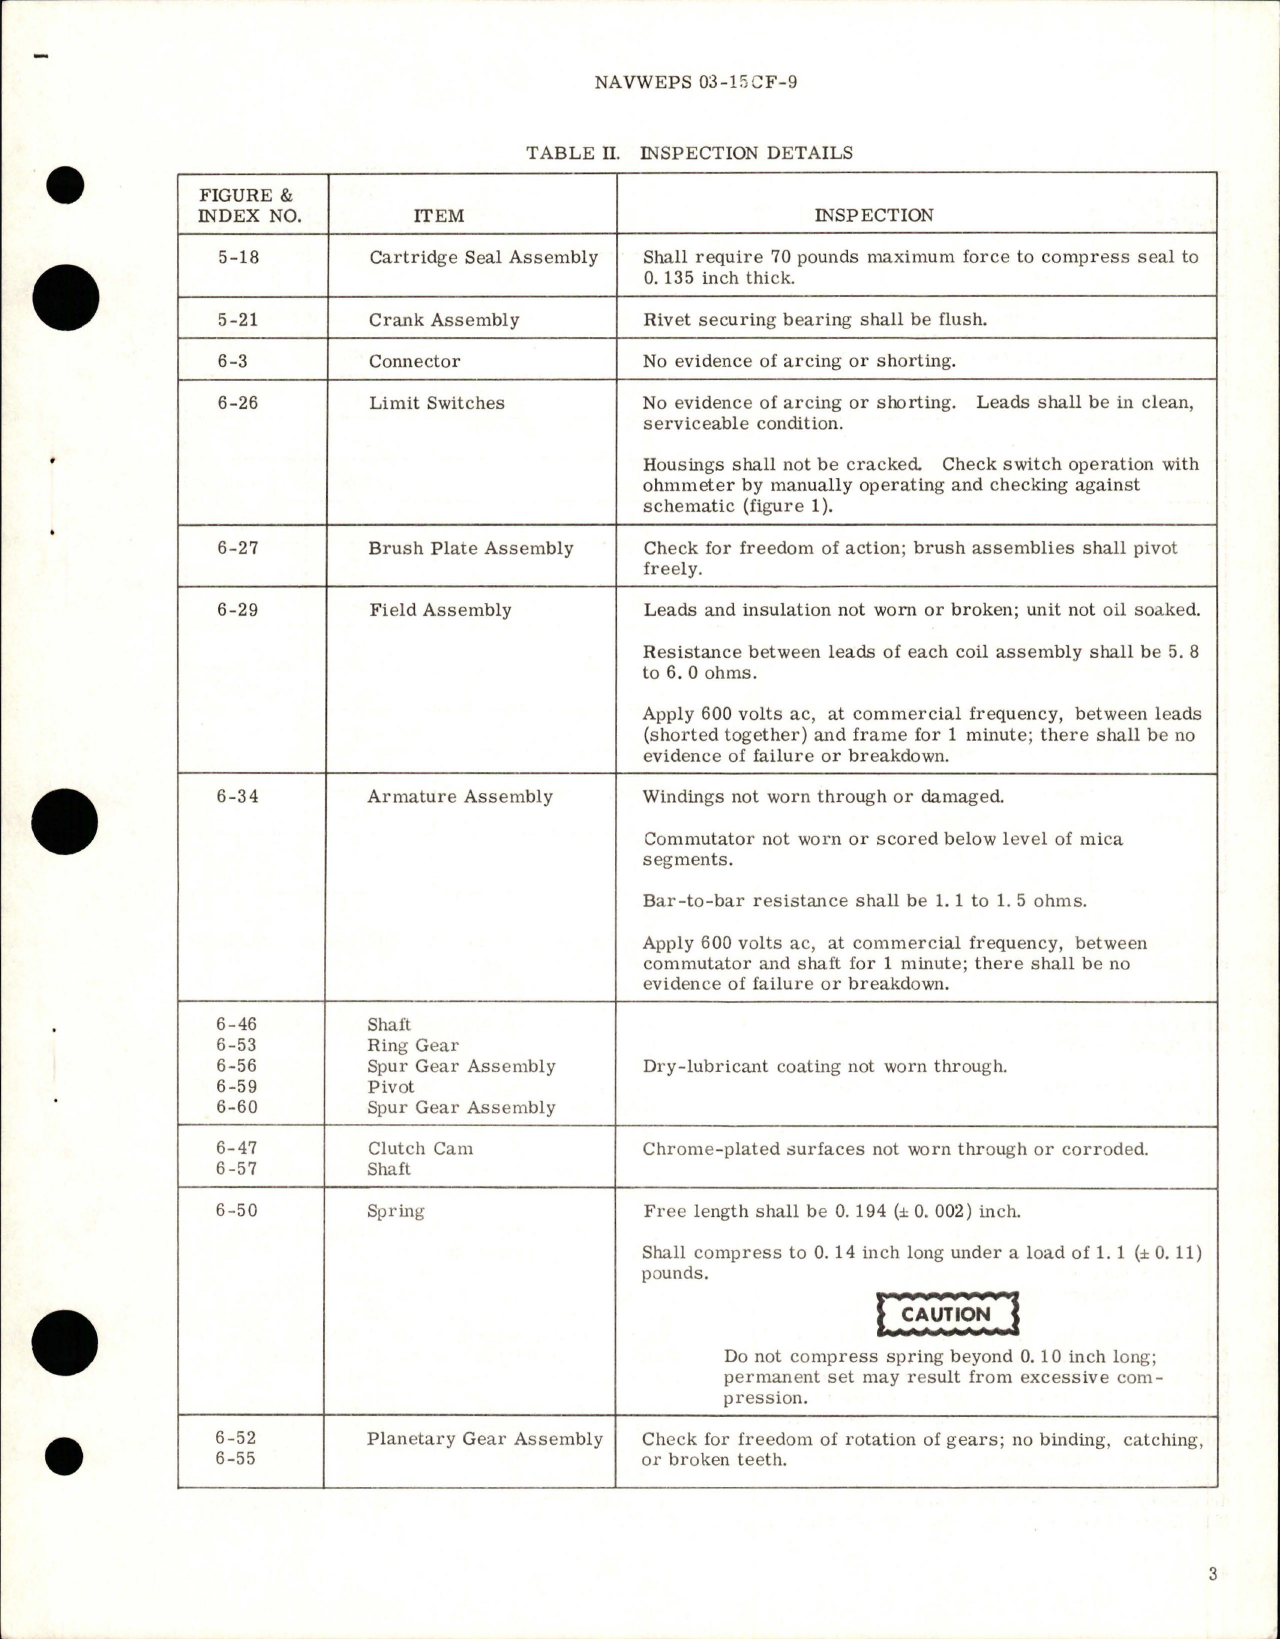 Sample page 5 from AirCorps Library document: Overhaul Instructions with Parts Breakdown for Motor Actuated Gate Shutoff Valve - Part 126335